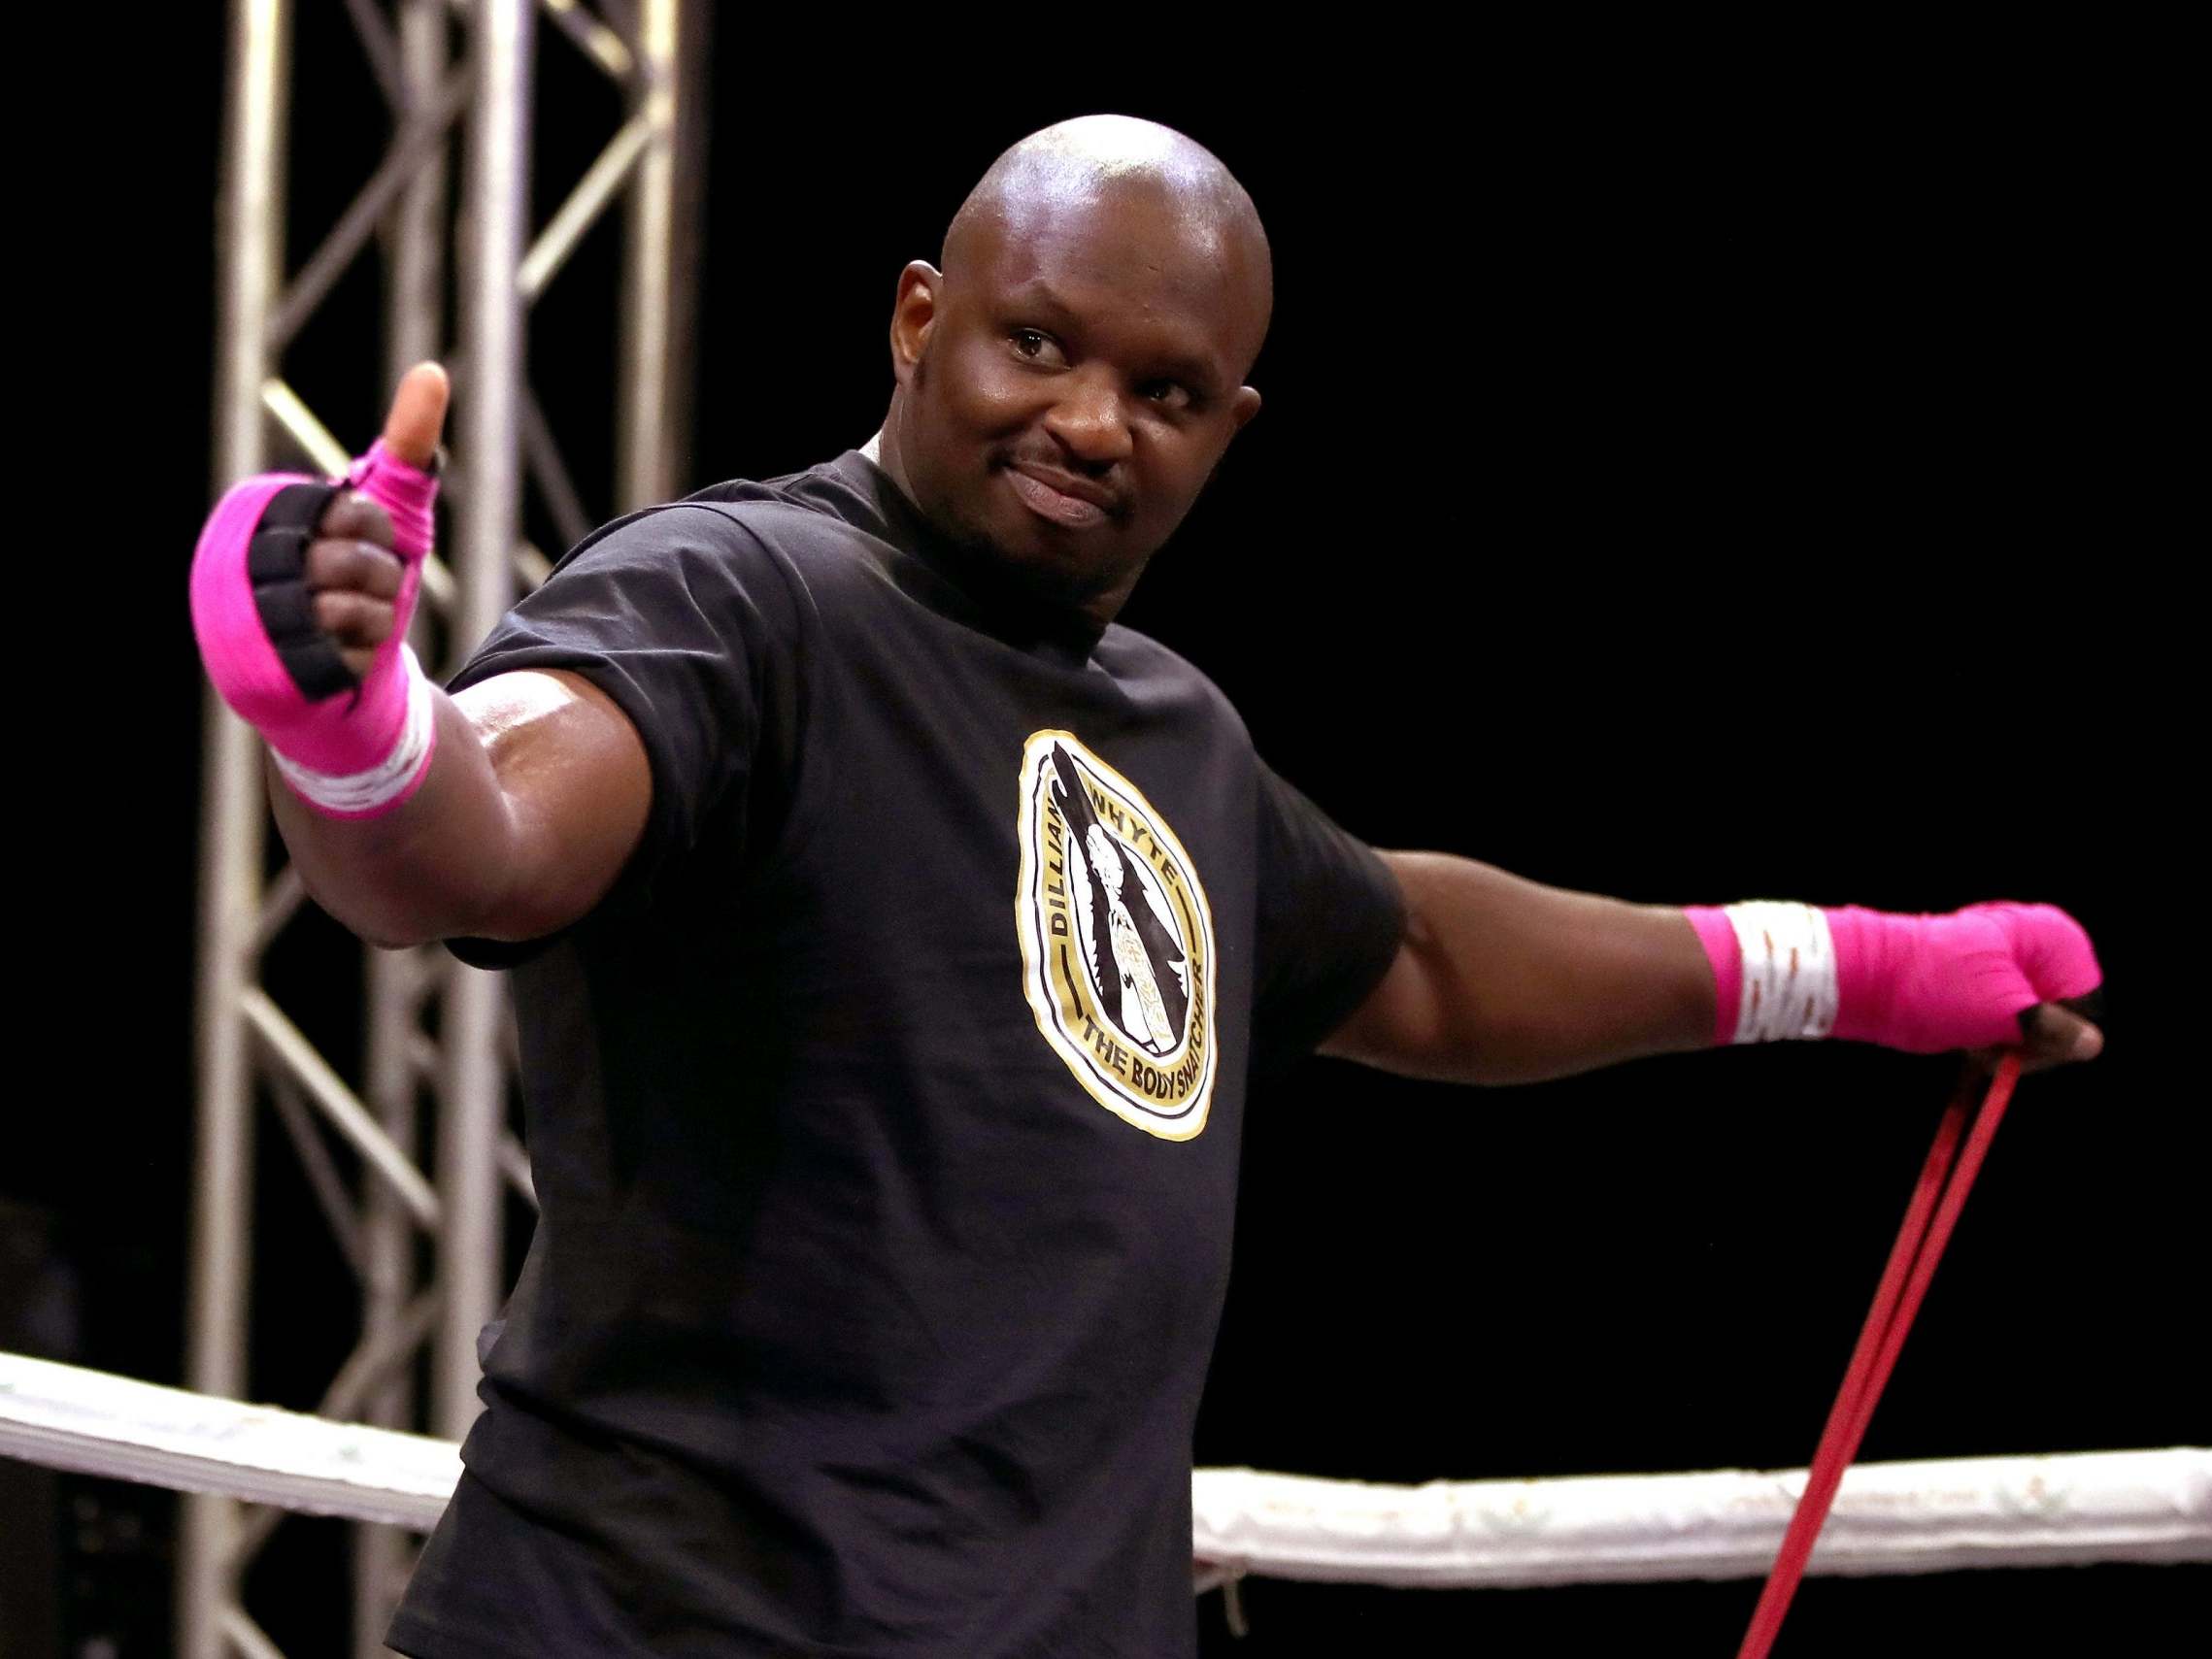 Dillian Whyte faces Alexander Povetkin on Saturday night